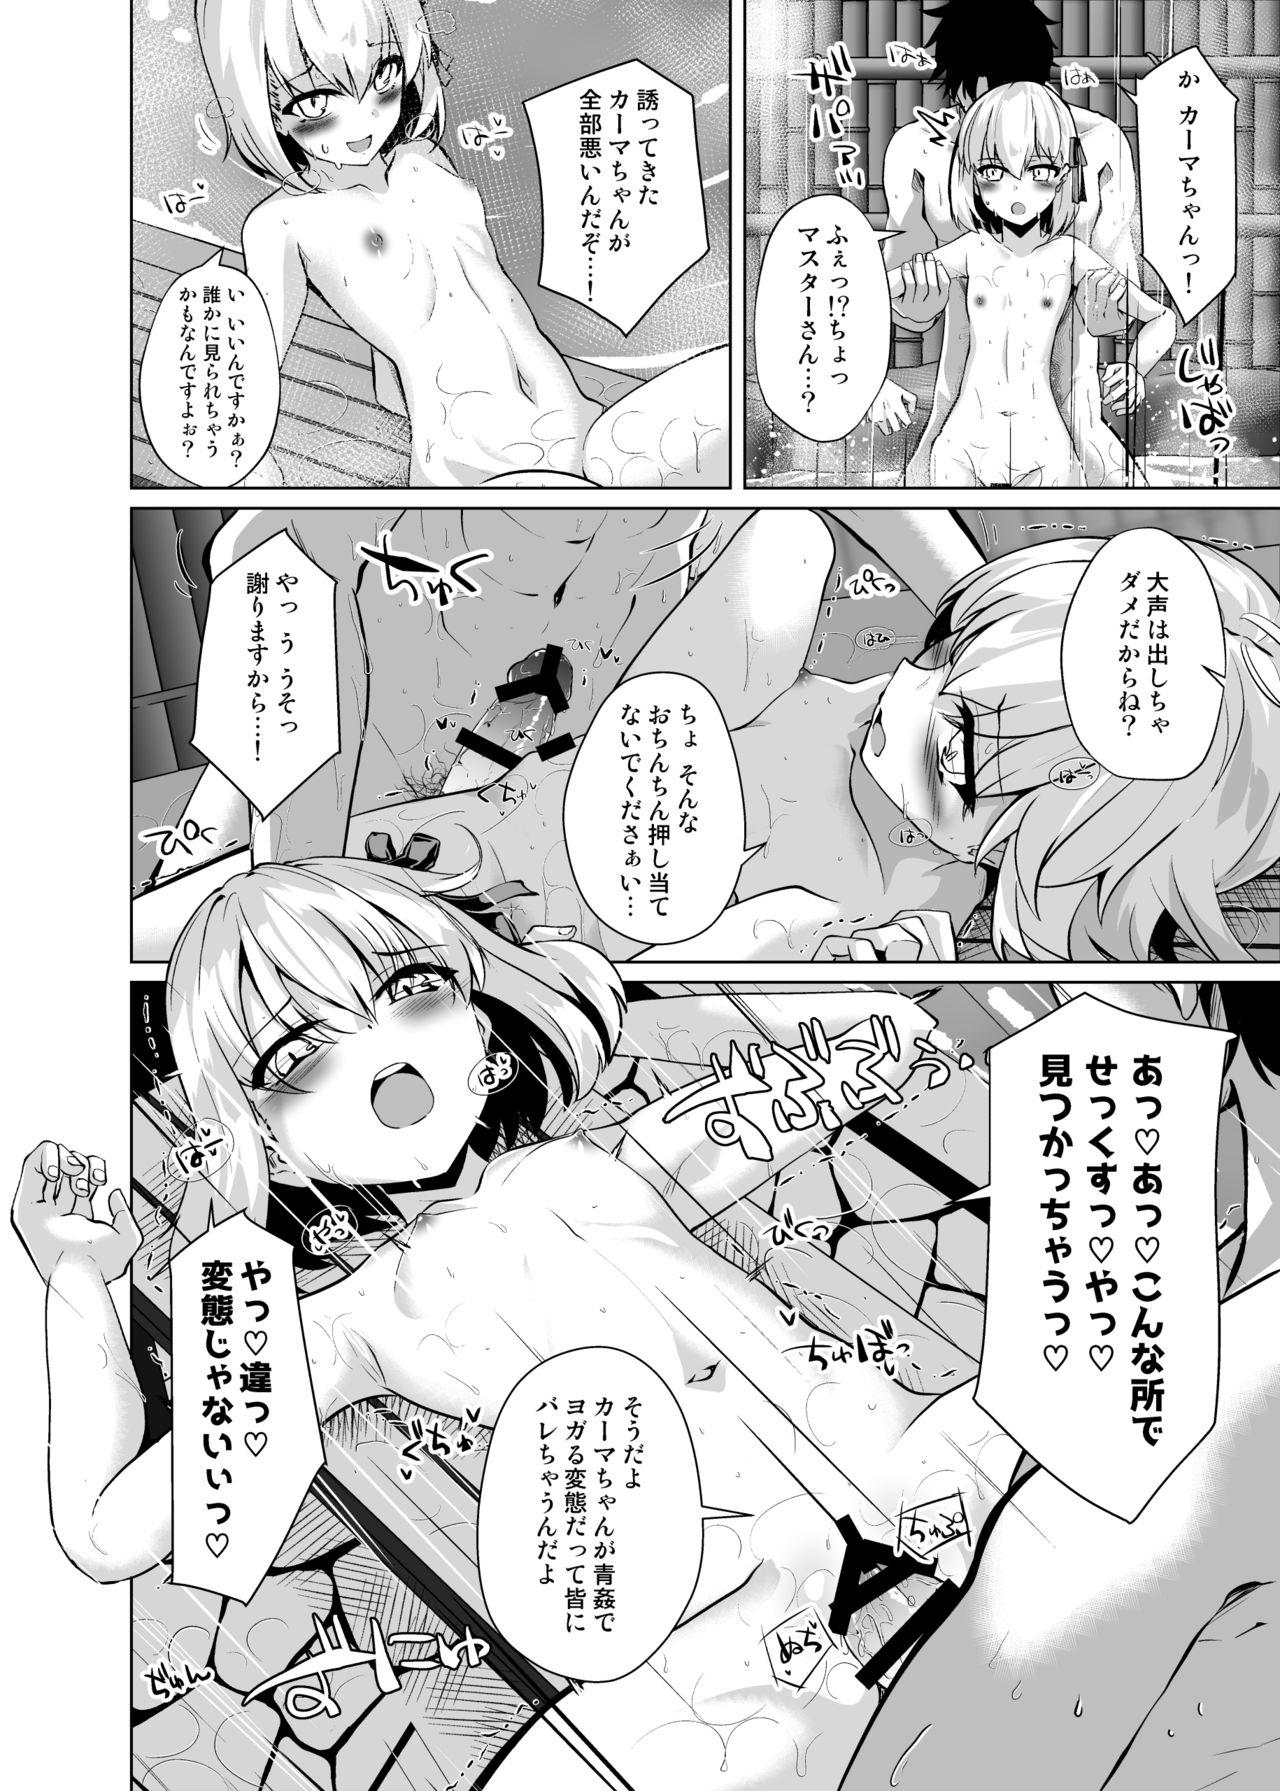 Watersports マスターさんのよわよわ棒に負け癖付けちゃいまーす - Fate grand order Gapes Gaping Asshole - Page 9